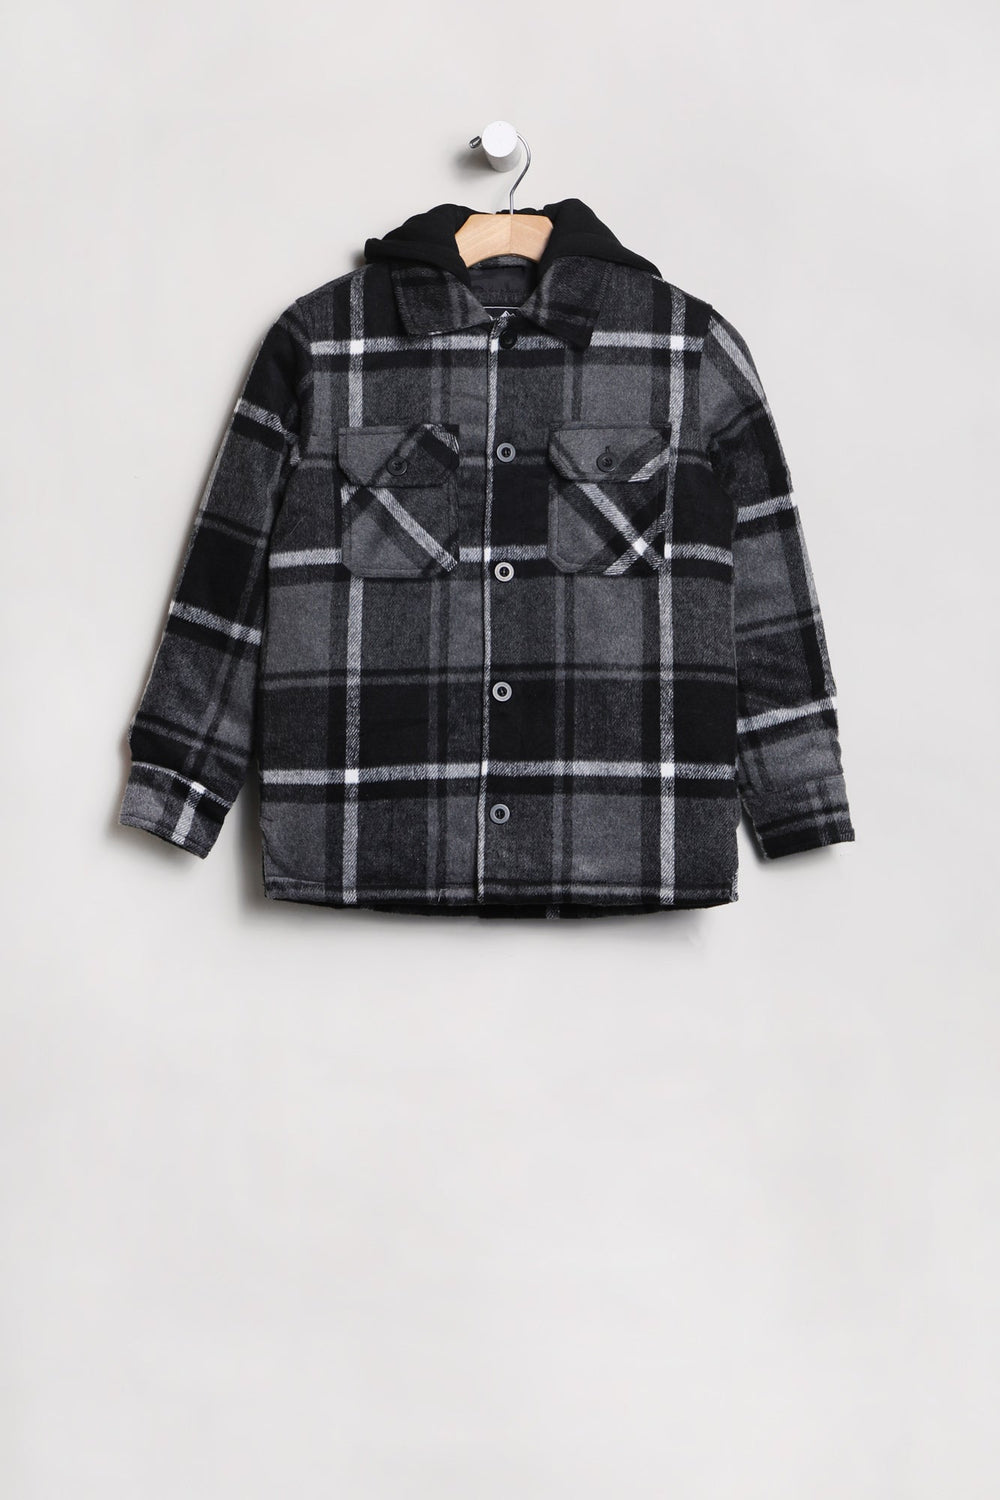 West49 Youth Lined Flannel Shacket Black